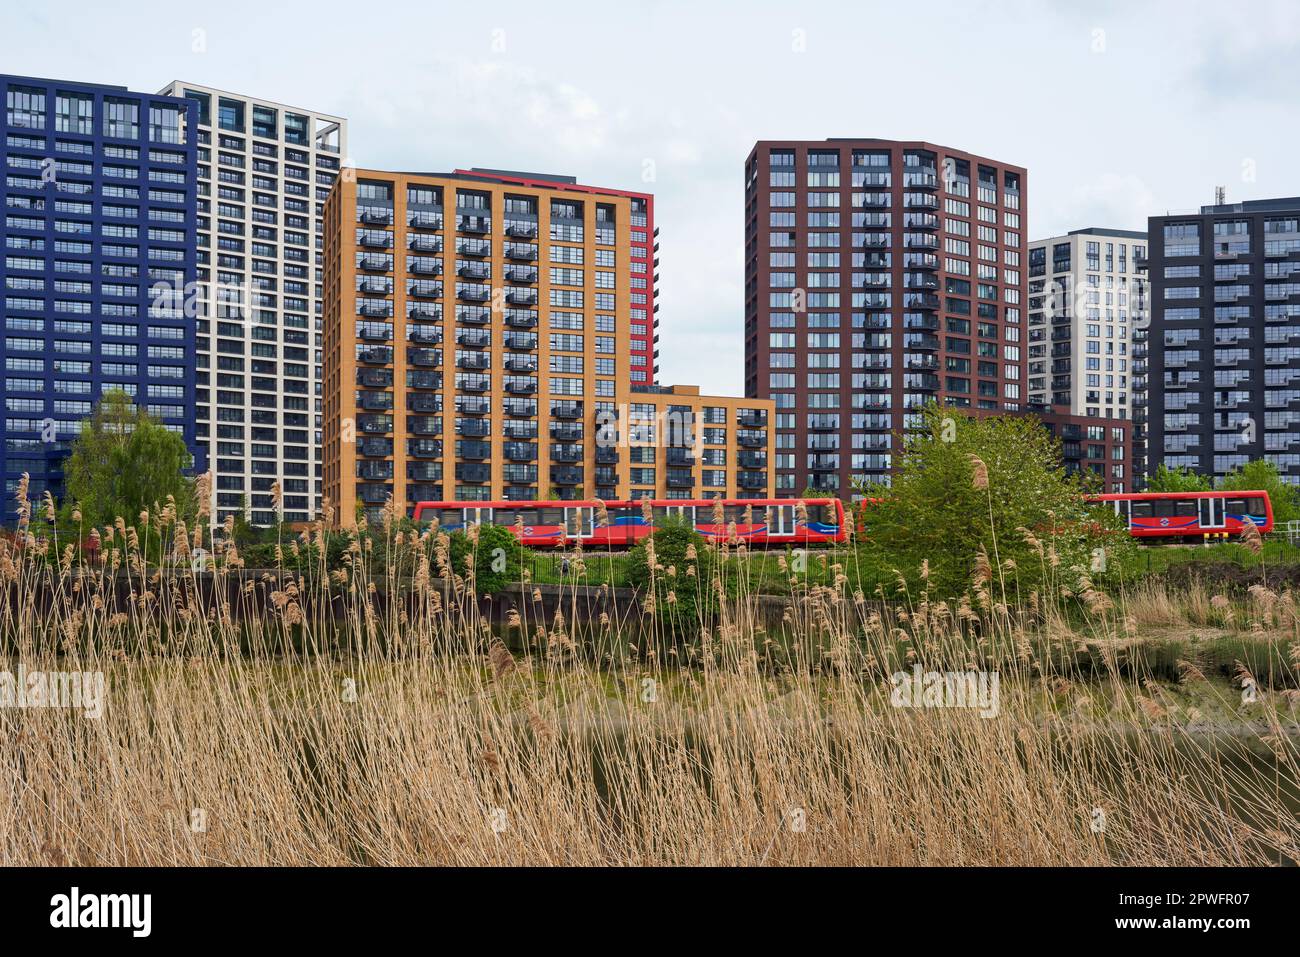 The new London City Island apartment complex and a Docklands Light Railway train, viewed from the banks of the River Lea, East London UK Stock Photo